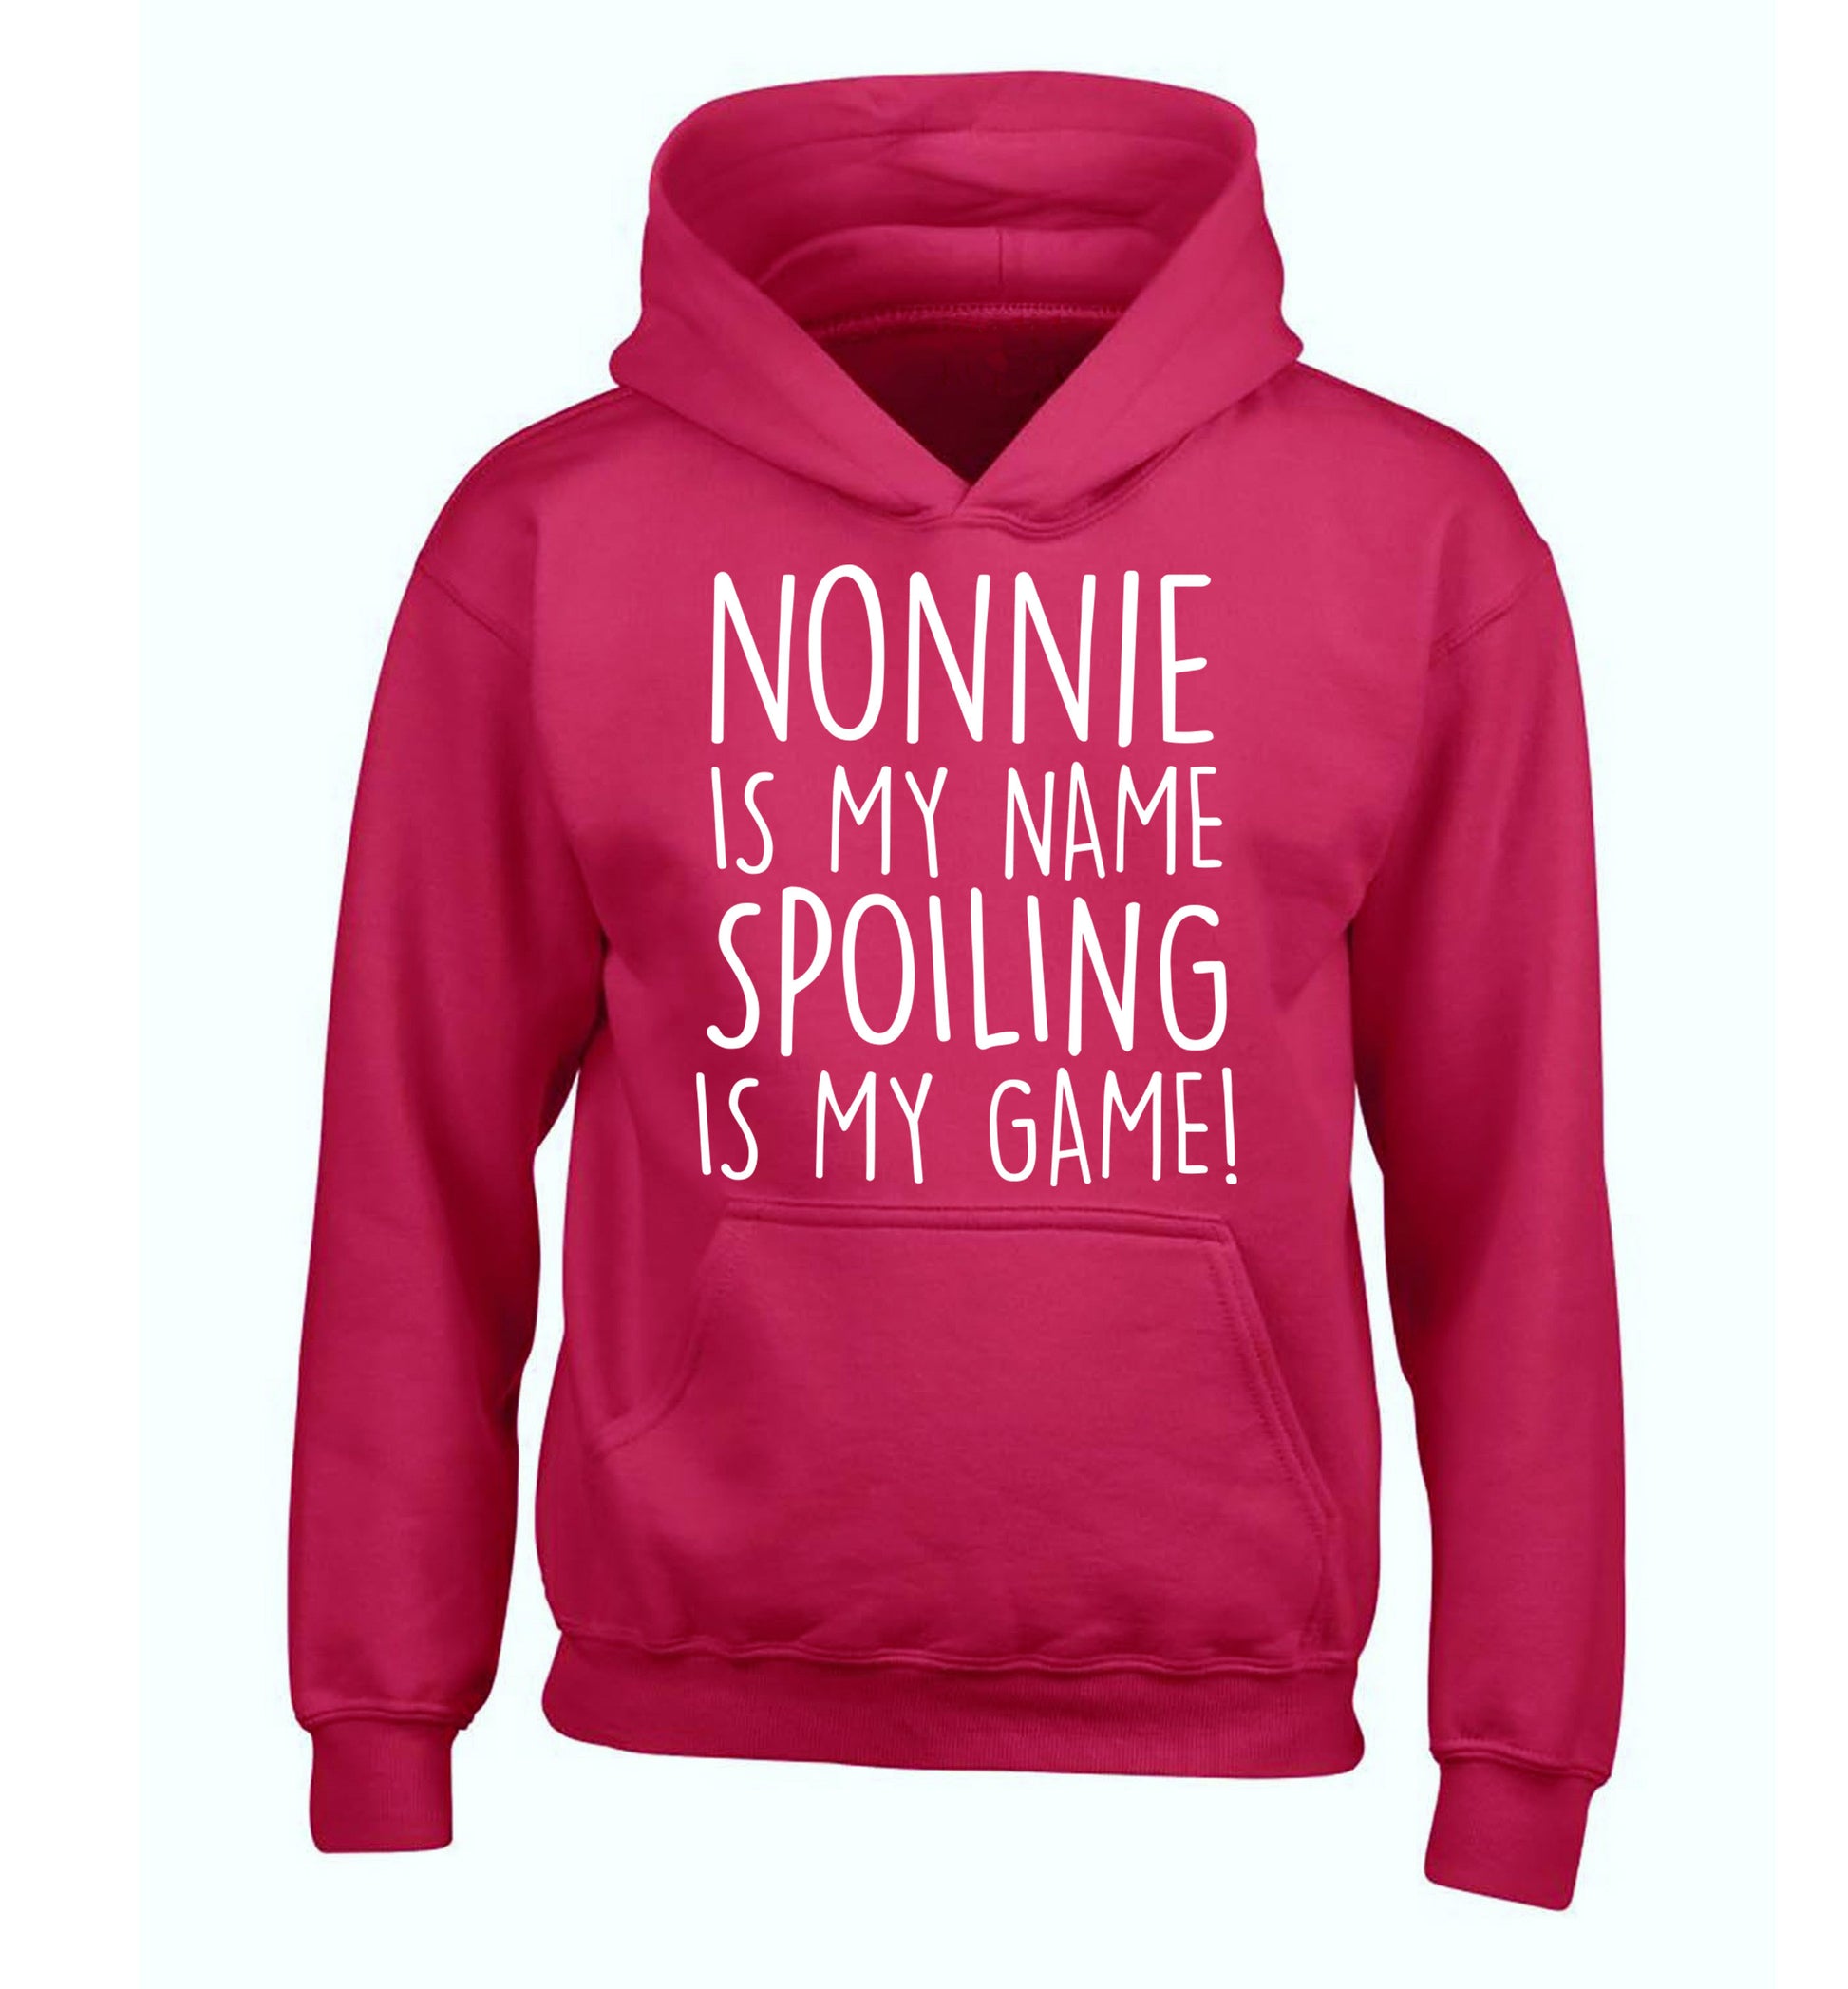 Nonnie is my name, spoiling is my game children's pink hoodie 12-14 Years